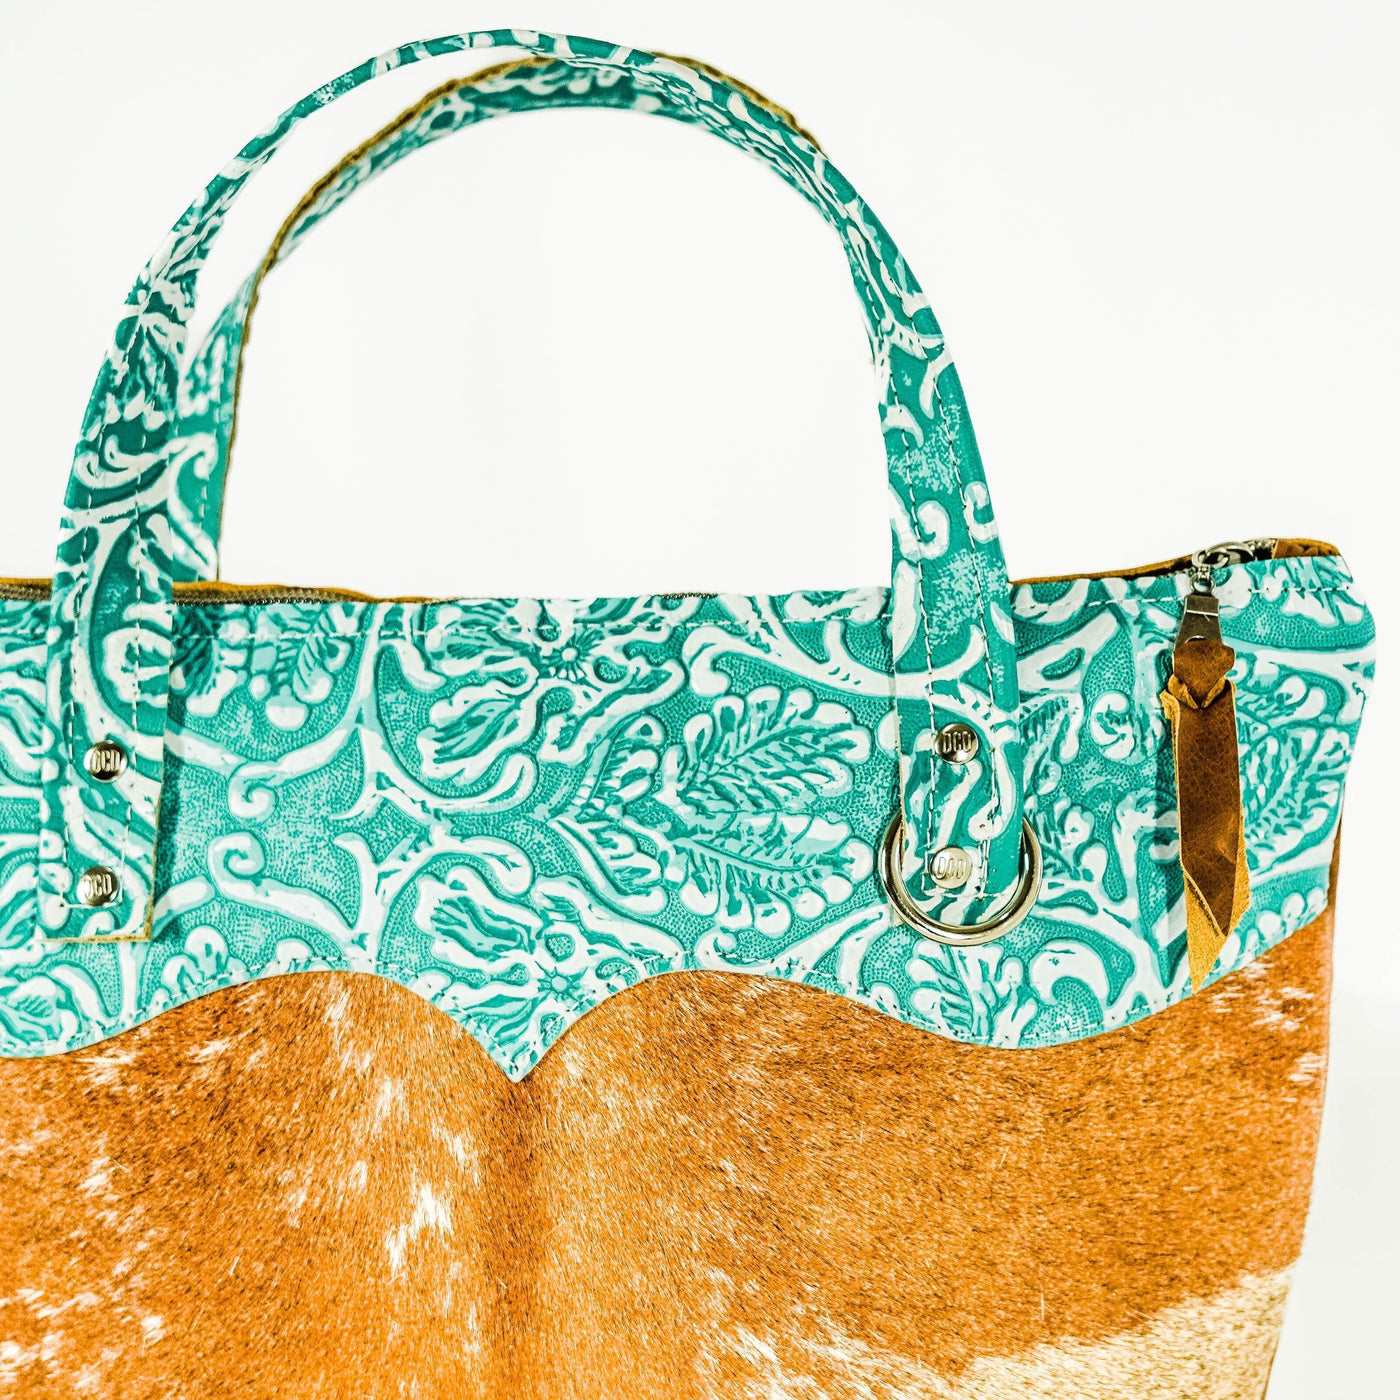 Feed Bag - Longhorn w/ Turquoise Sand Tool-Feed Bag-Western-Cowhide-Bags-Handmade-Products-Gifts-Dancing Cactus Designs